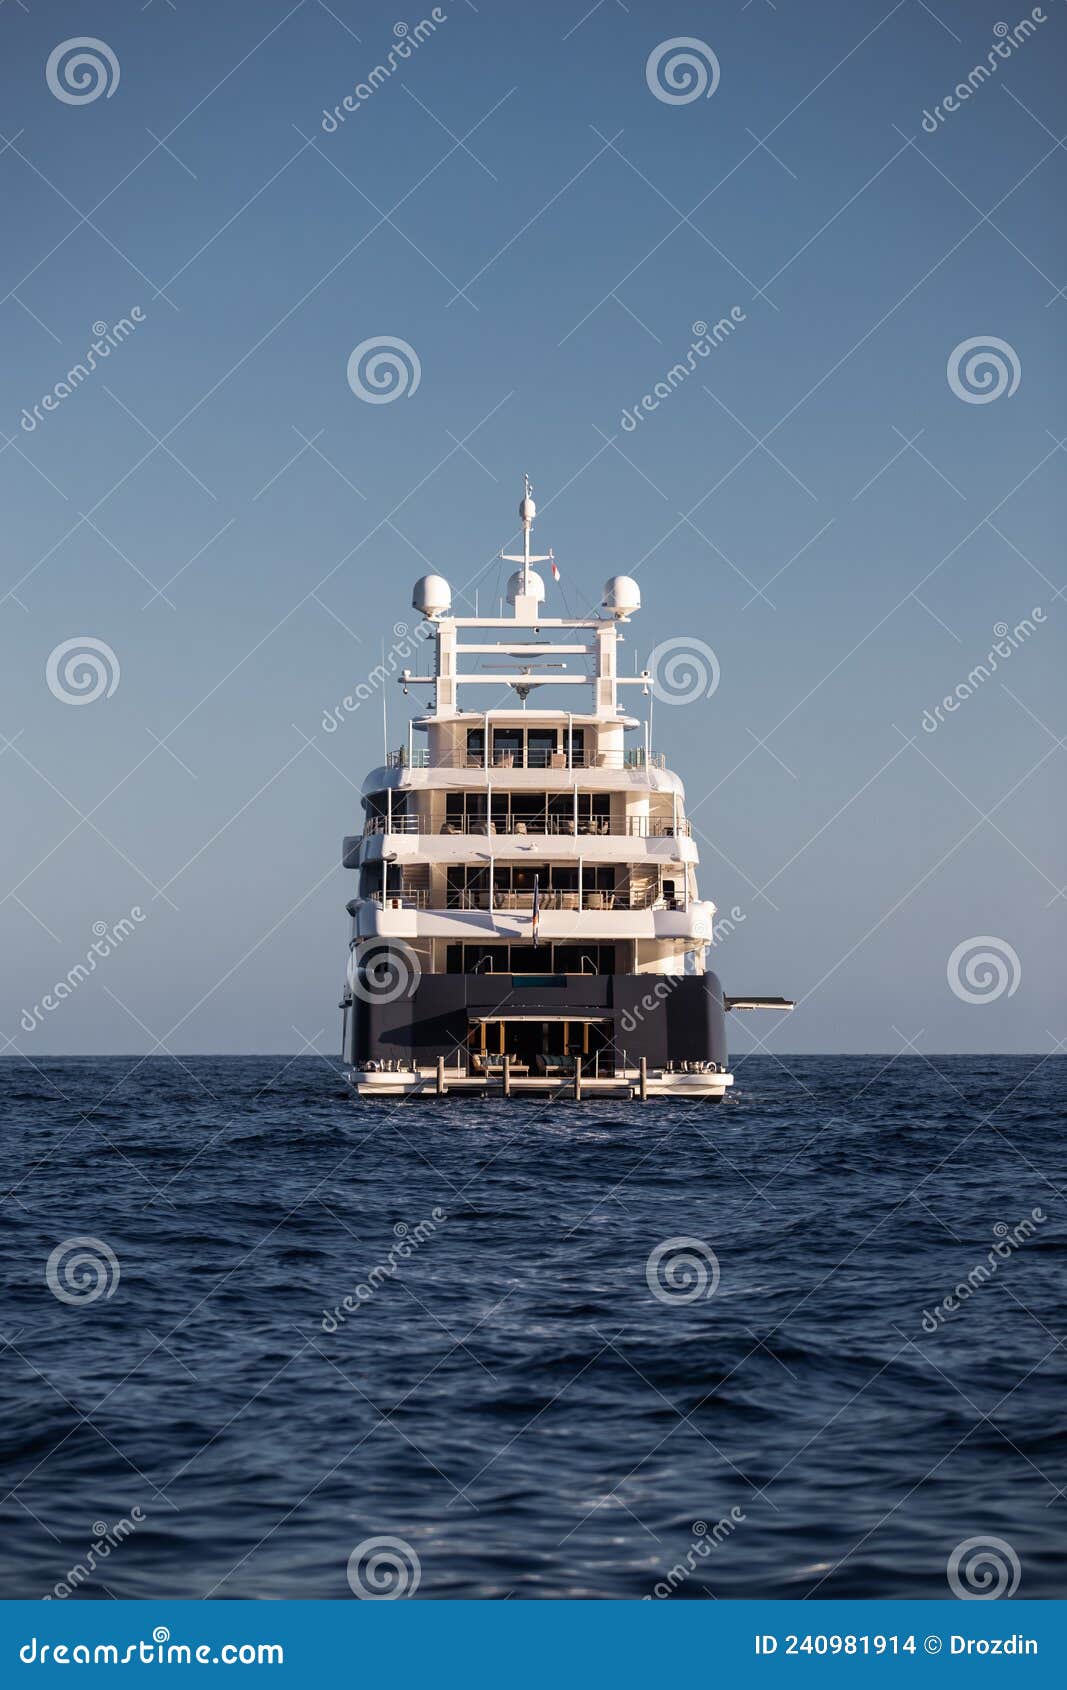 the boat stern of huge yacht in sea at sunny day, glossy board of the motor boat, the chrome plated handrail, megayacht